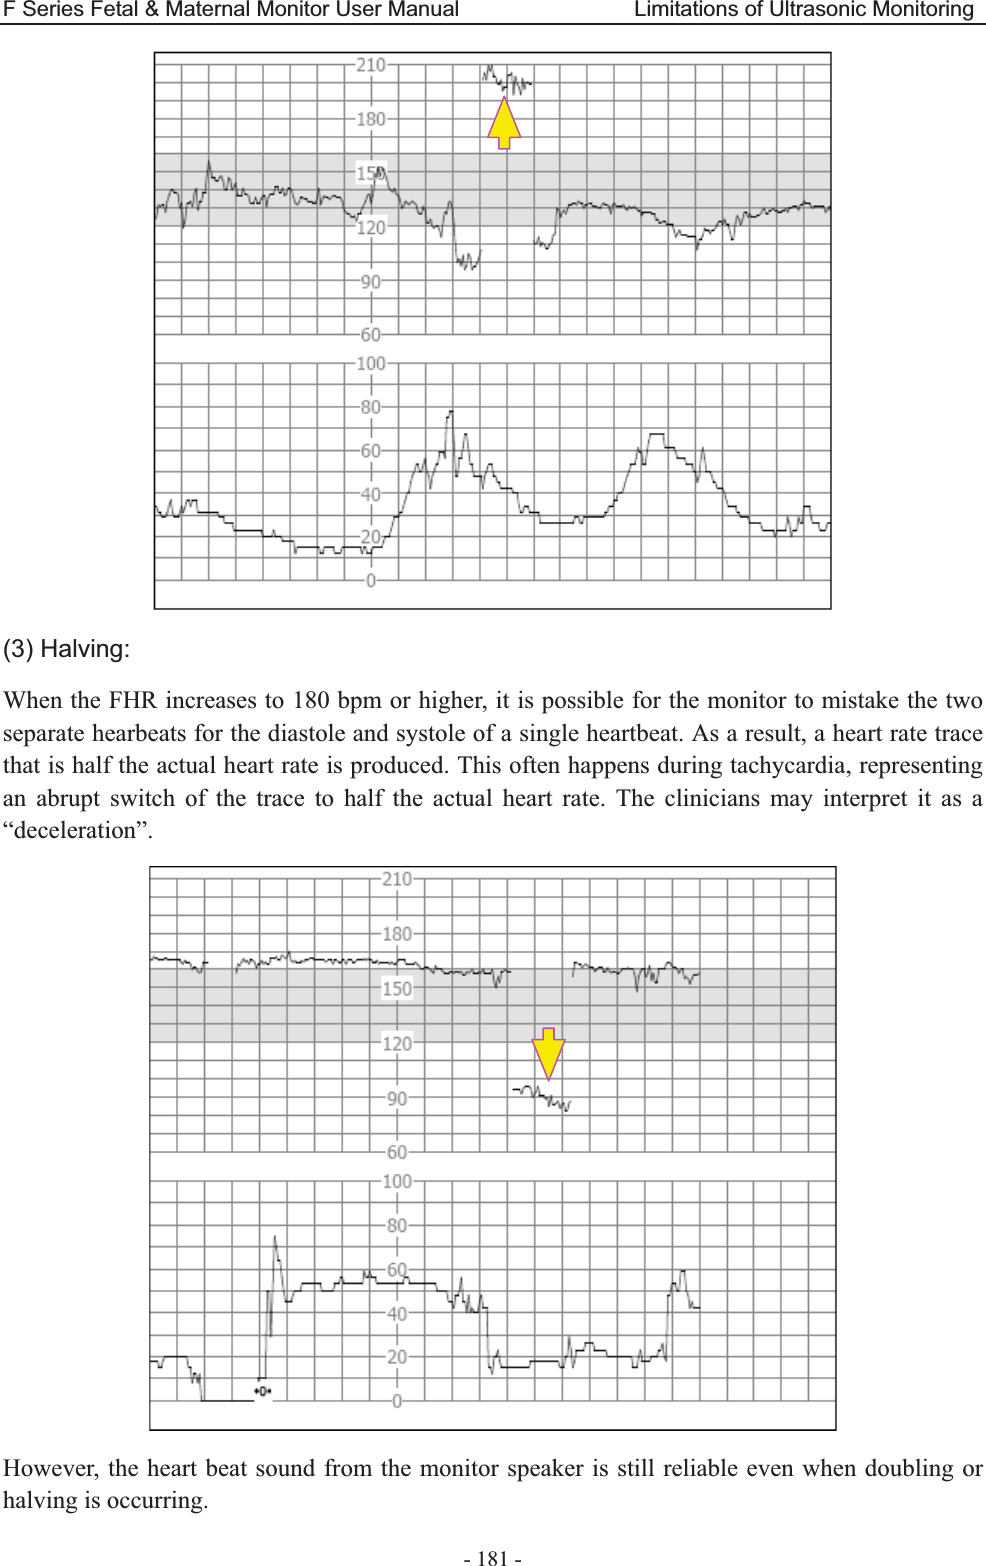 F Series Fetal &amp; Maternal Monitor User Manual                                Limitations of Ultrasonic Monitoring - 181 -  (3) Halving: When the FHR increases to 180 bpm or higher, it is possible for the monitor to mistake the two separate hearbeats for the diastole and systole of a single heartbeat. As a result, a heart rate trace that is half the actual heart rate is produced. This often happens during tachycardia, representing an abrupt switch of the trace to half the actual heart rate. The clinicians may interpret it as a “deceleration”.  However, the heart beat sound from the monitor speaker is still reliable even when doubling or halving is occurring. 